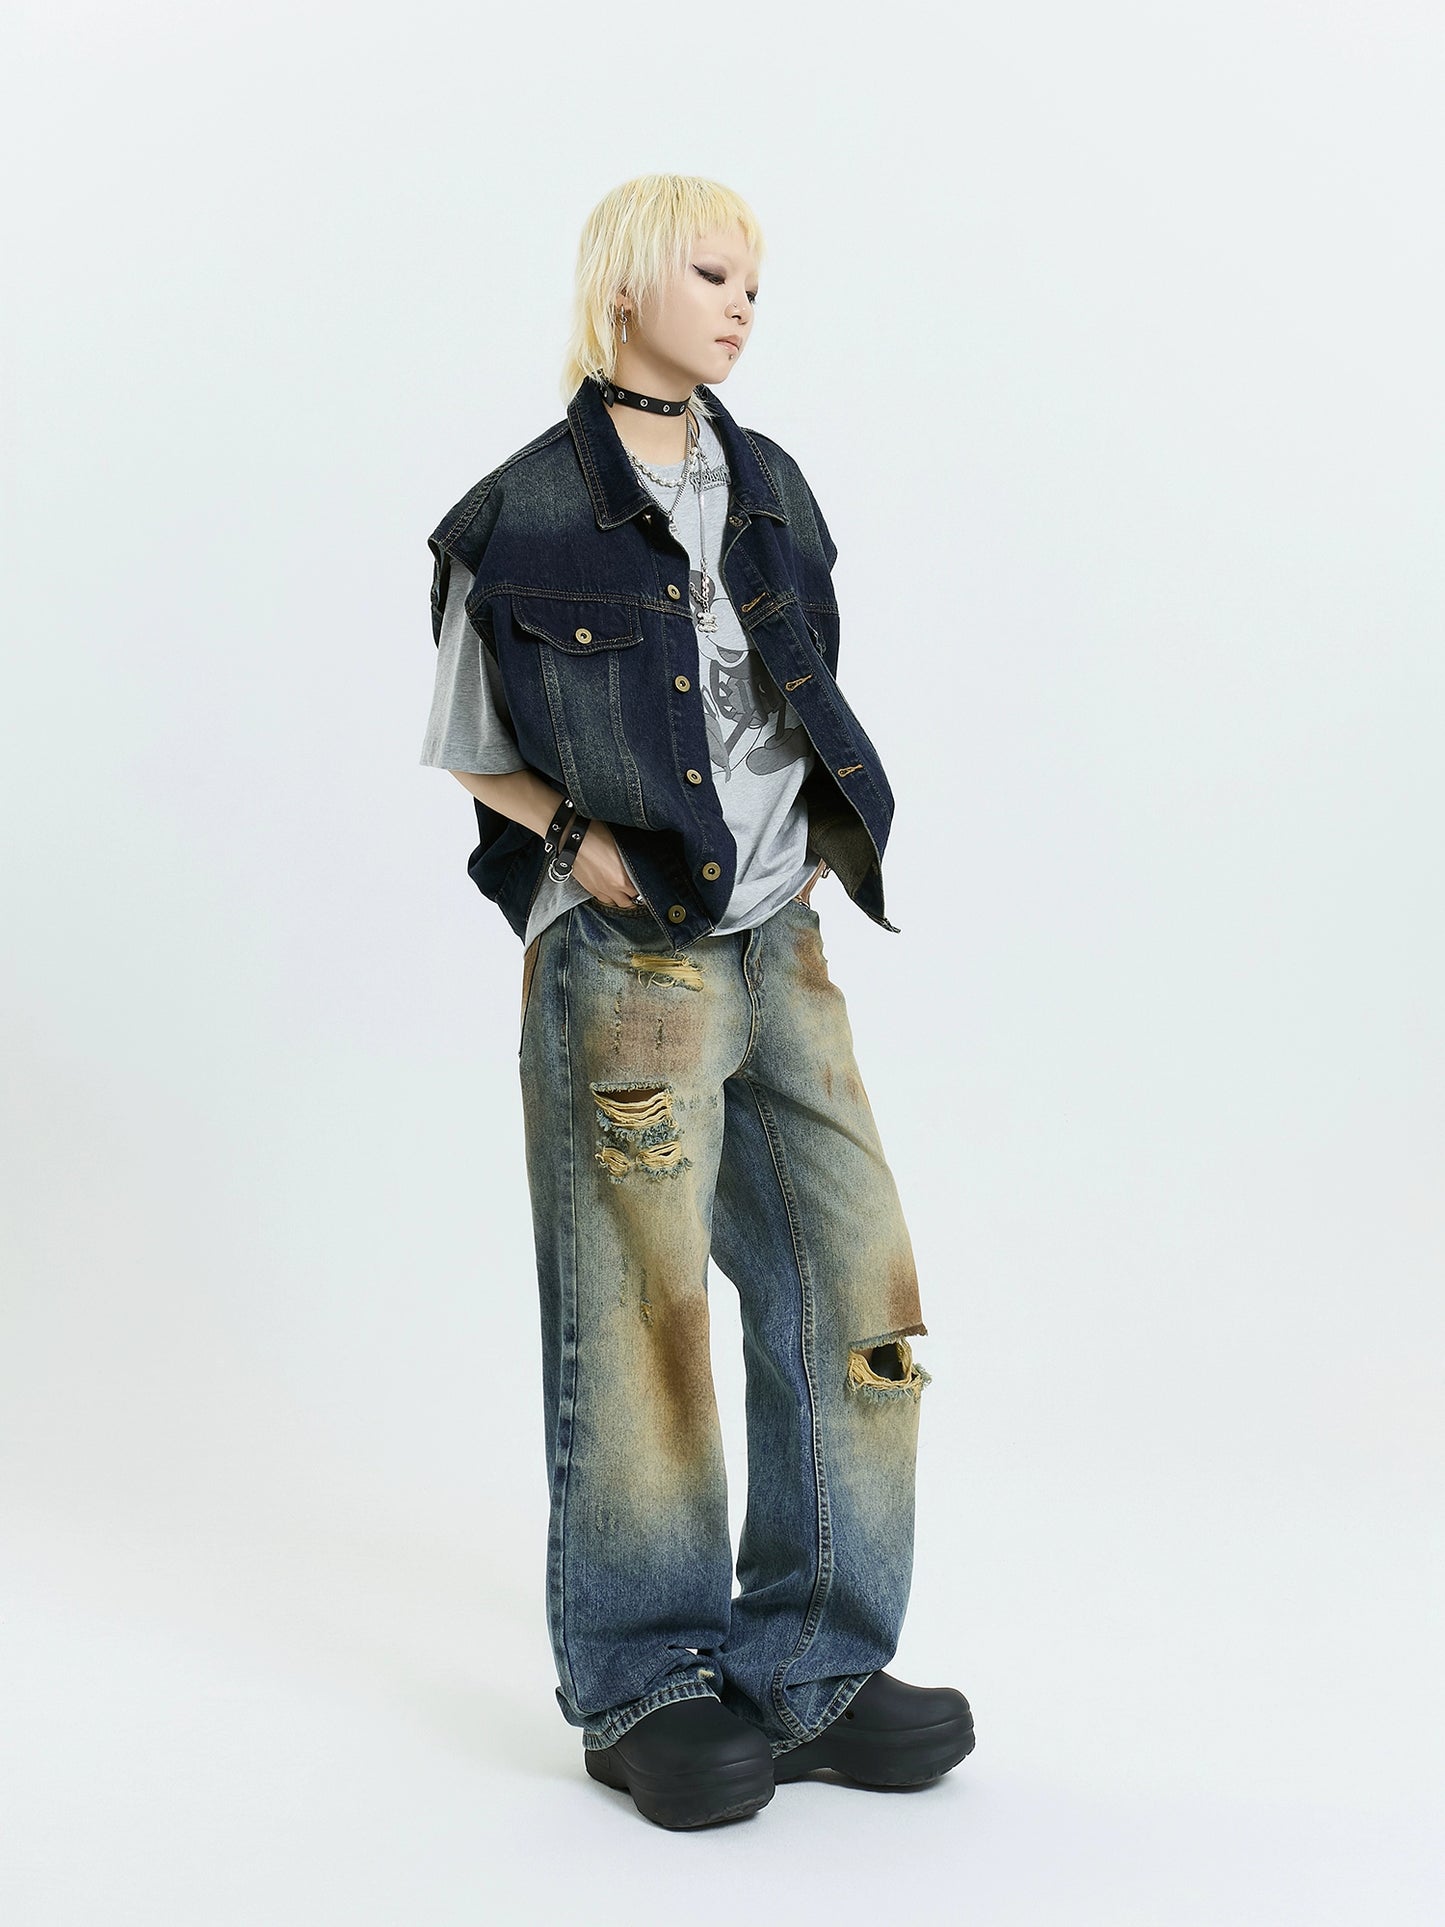 MICHINNYON American retro wash, dirty, old, ripped and ruined design, high street baggy jeans